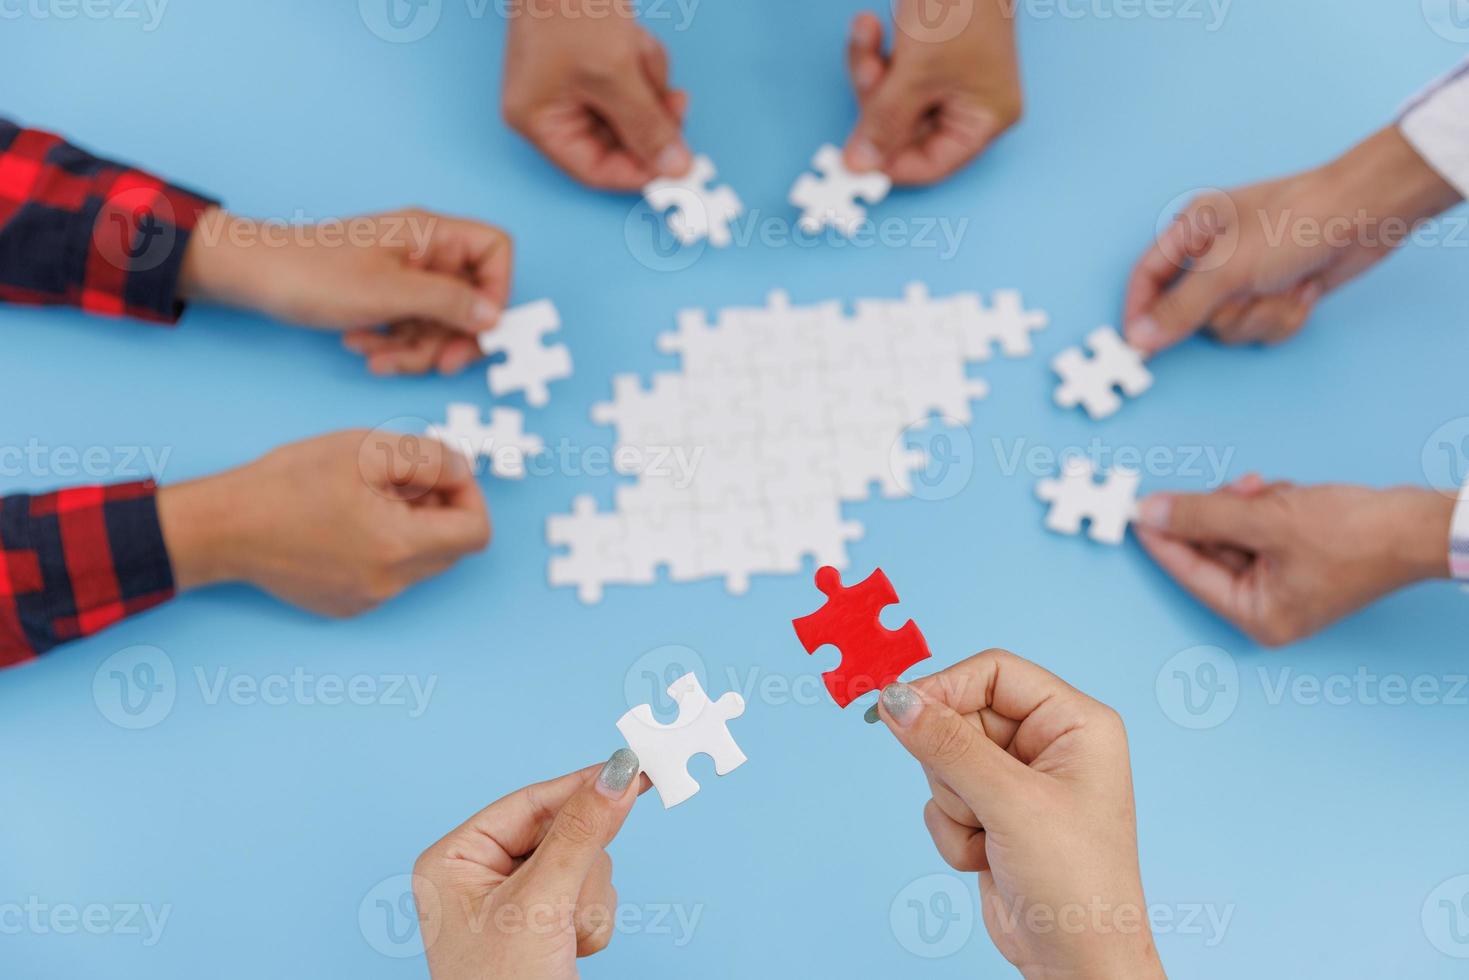 Hands of diverse people assembling jigsaw puzzle, team put pieces together  searching for right match, help support in teamwork to find common solution  concept, top close up view 8316659 Stock Photo at